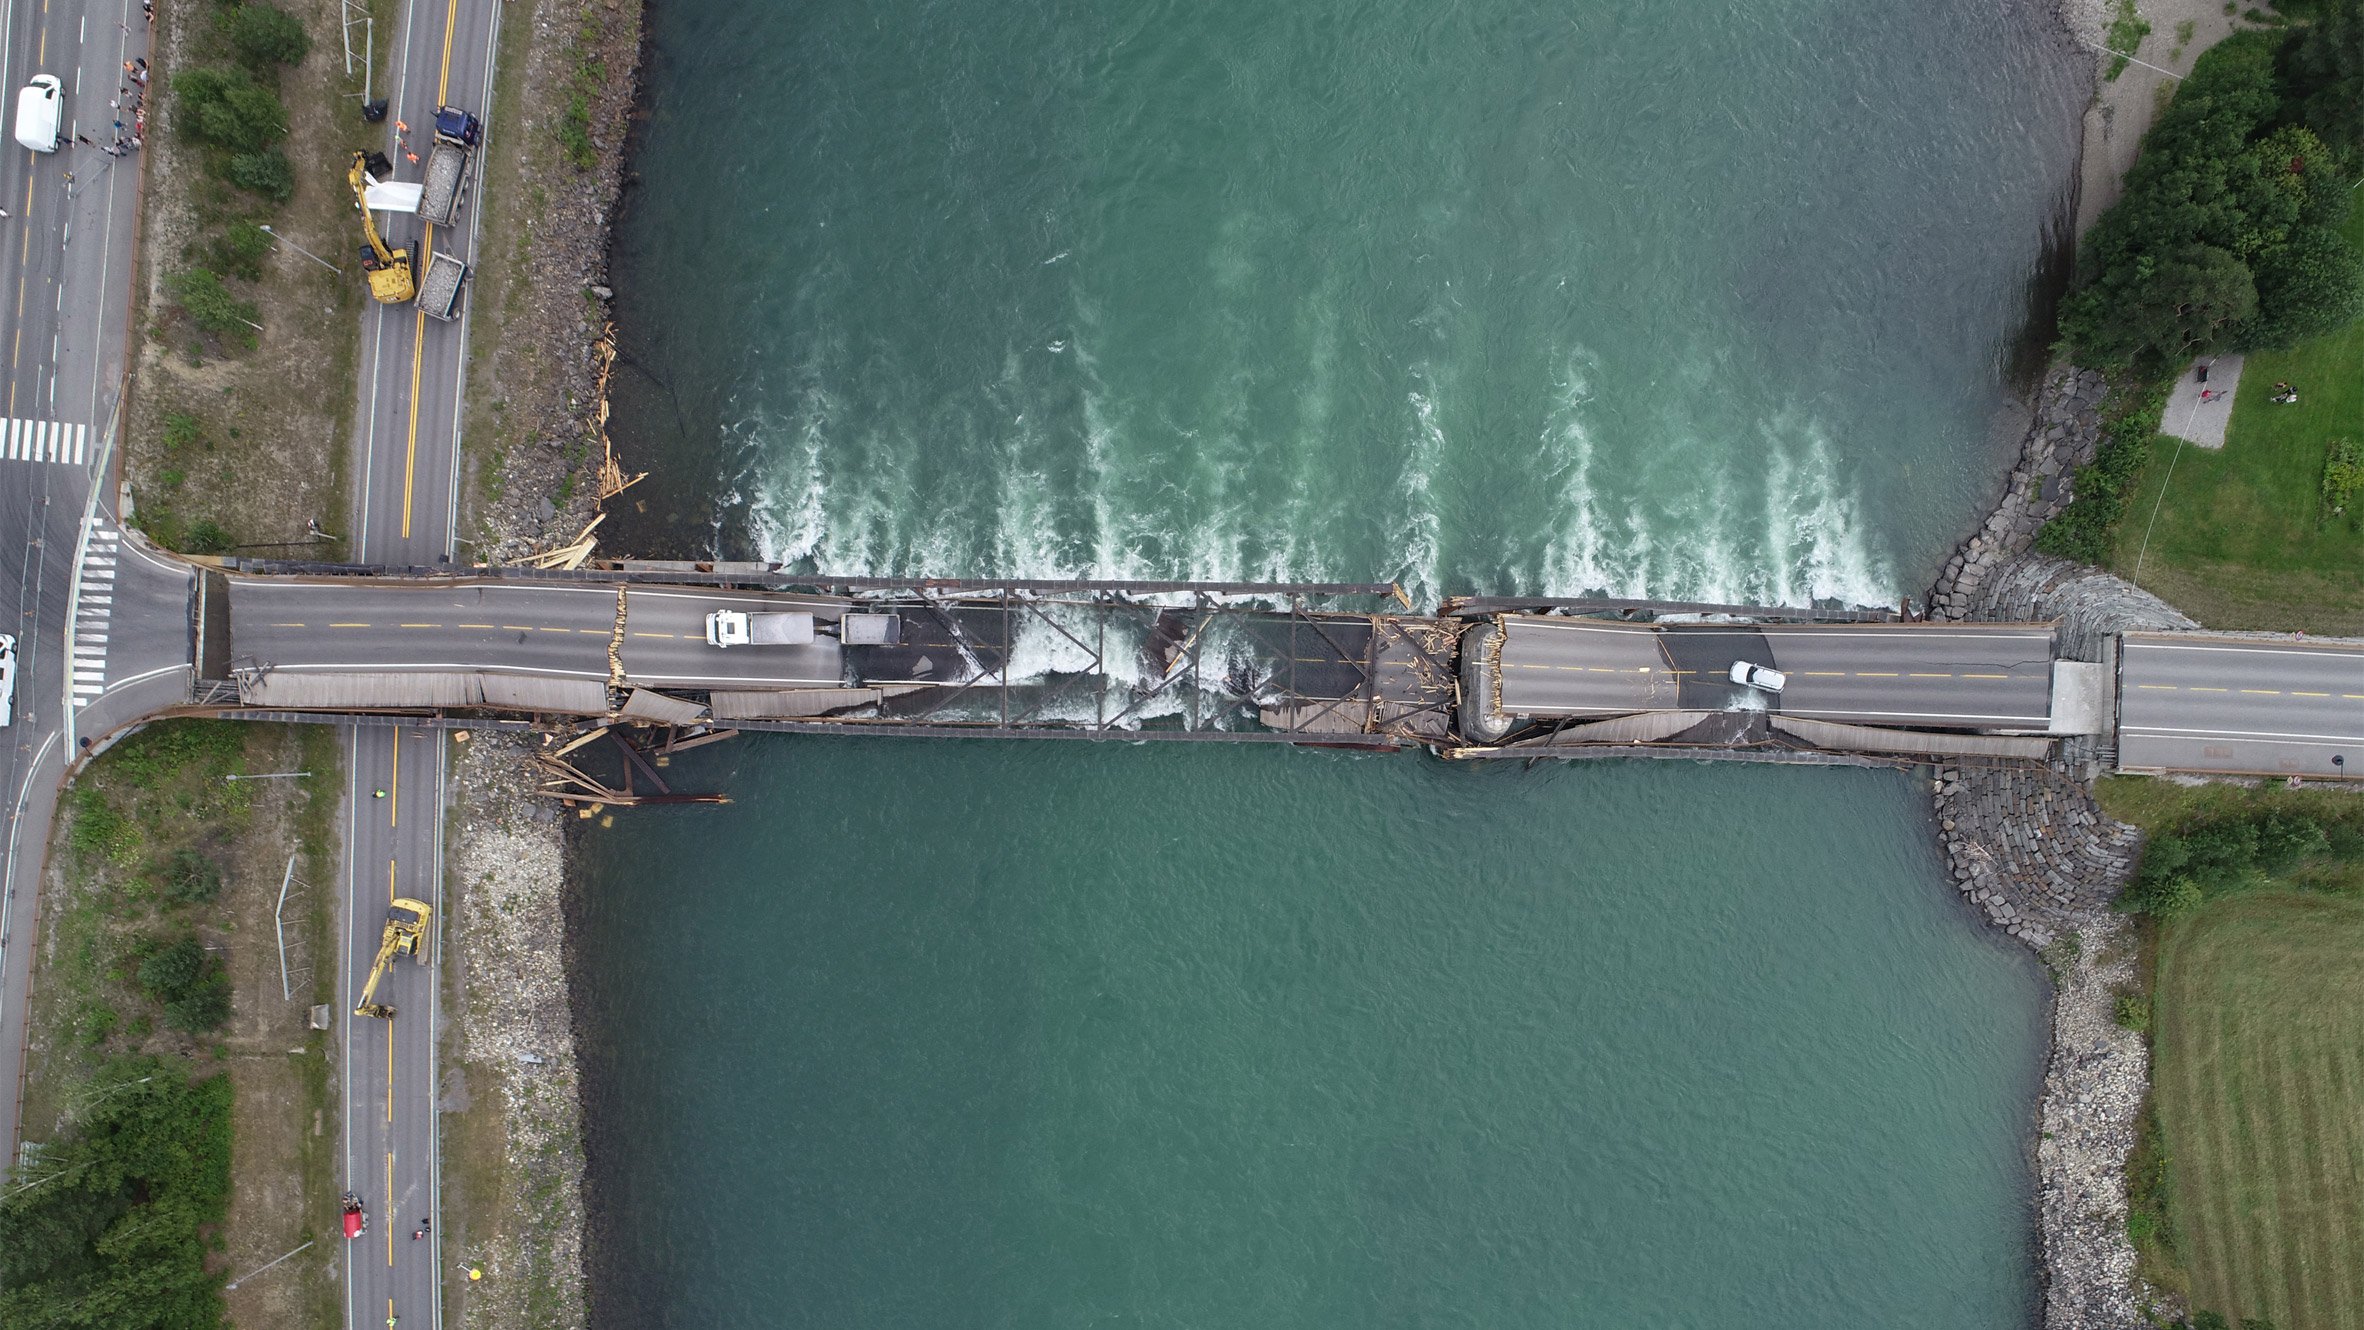 Aftermath of the Tretten Bridge collapse seen from above